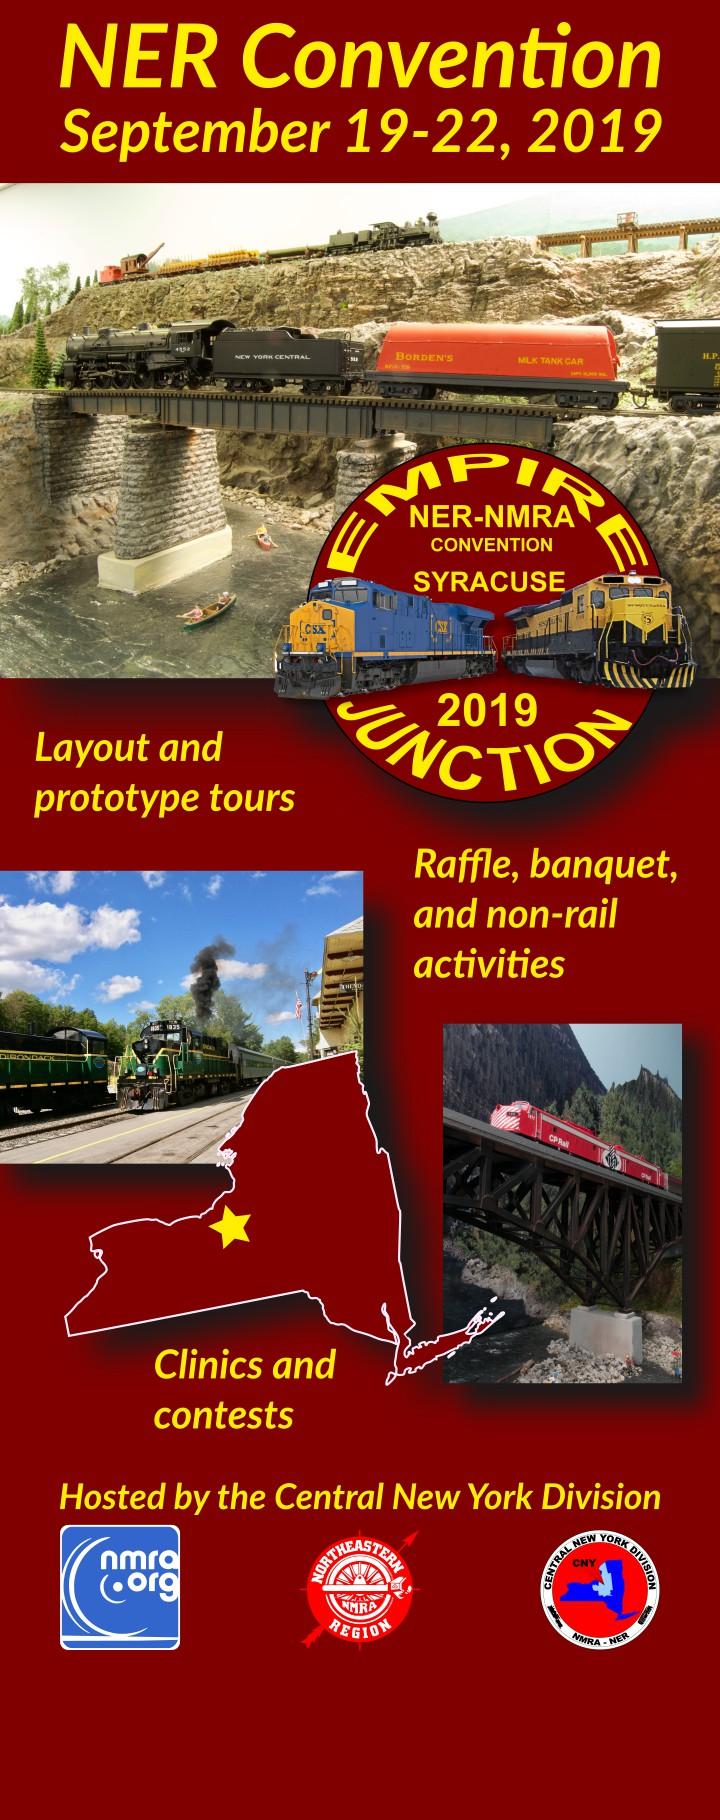 Loose Spikes, (Cont. from pg. 2) Train Shows! The Division is planning to attend some of the Train Shows in the area to promote the 2019 Convention.